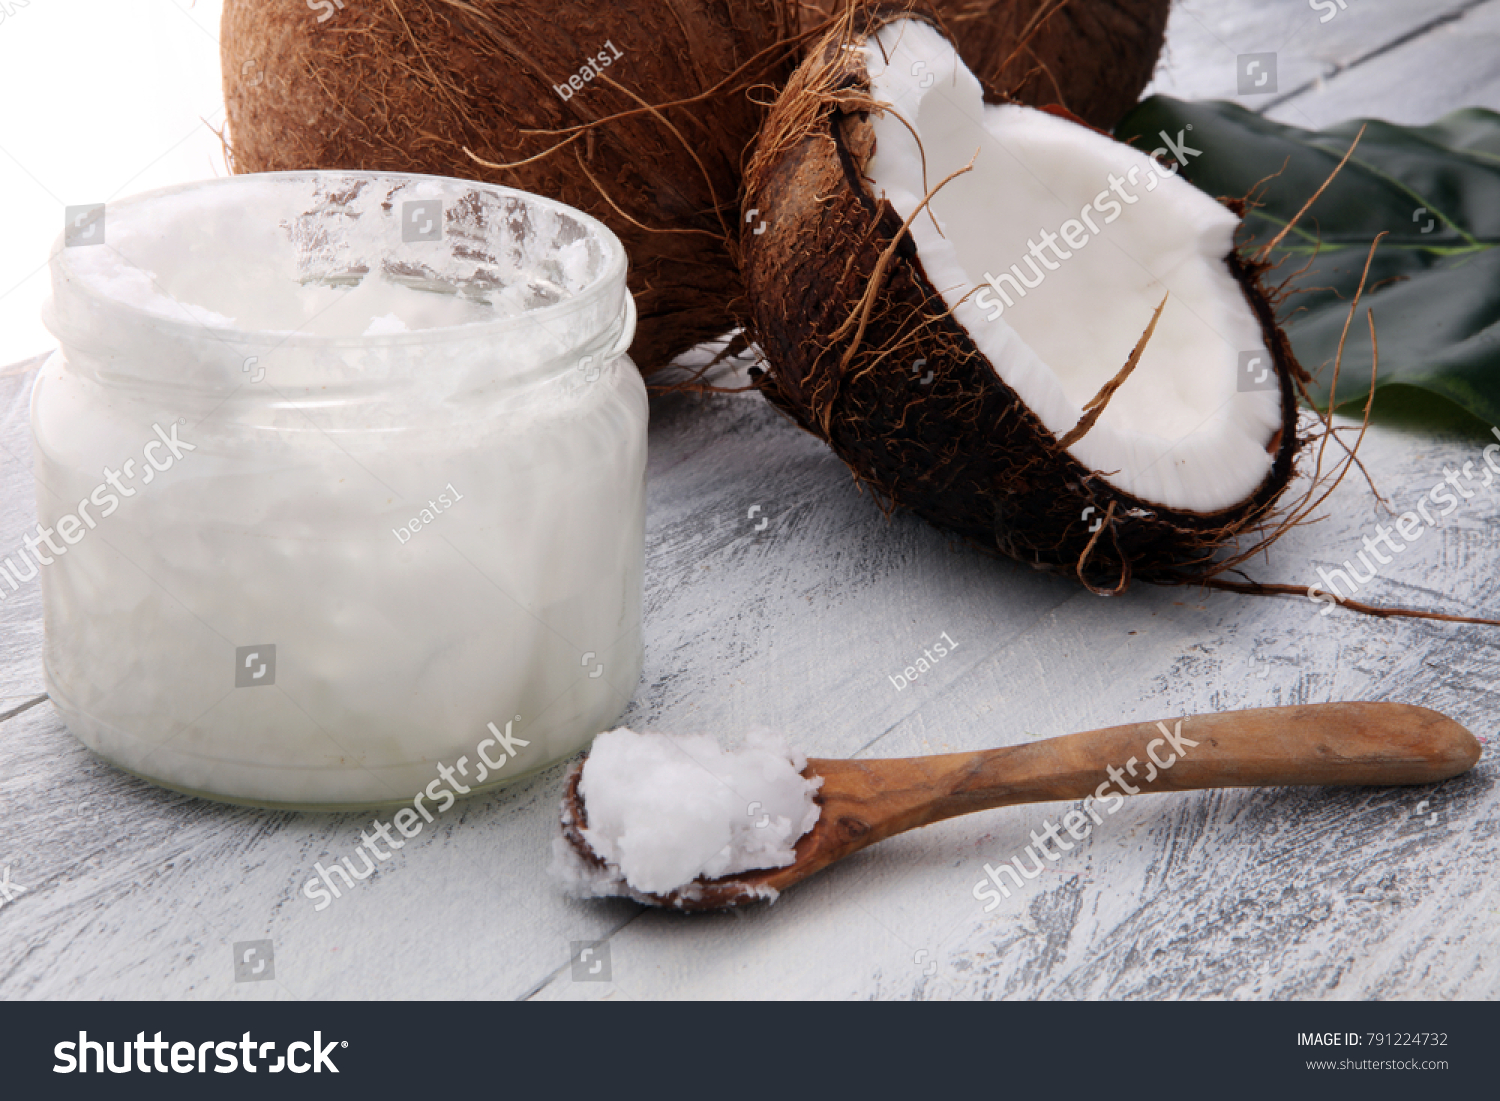 Download Coconut Opened Glass Jar Fresh Coconut Stock Photo Edit Now 791224732 PSD Mockup Templates